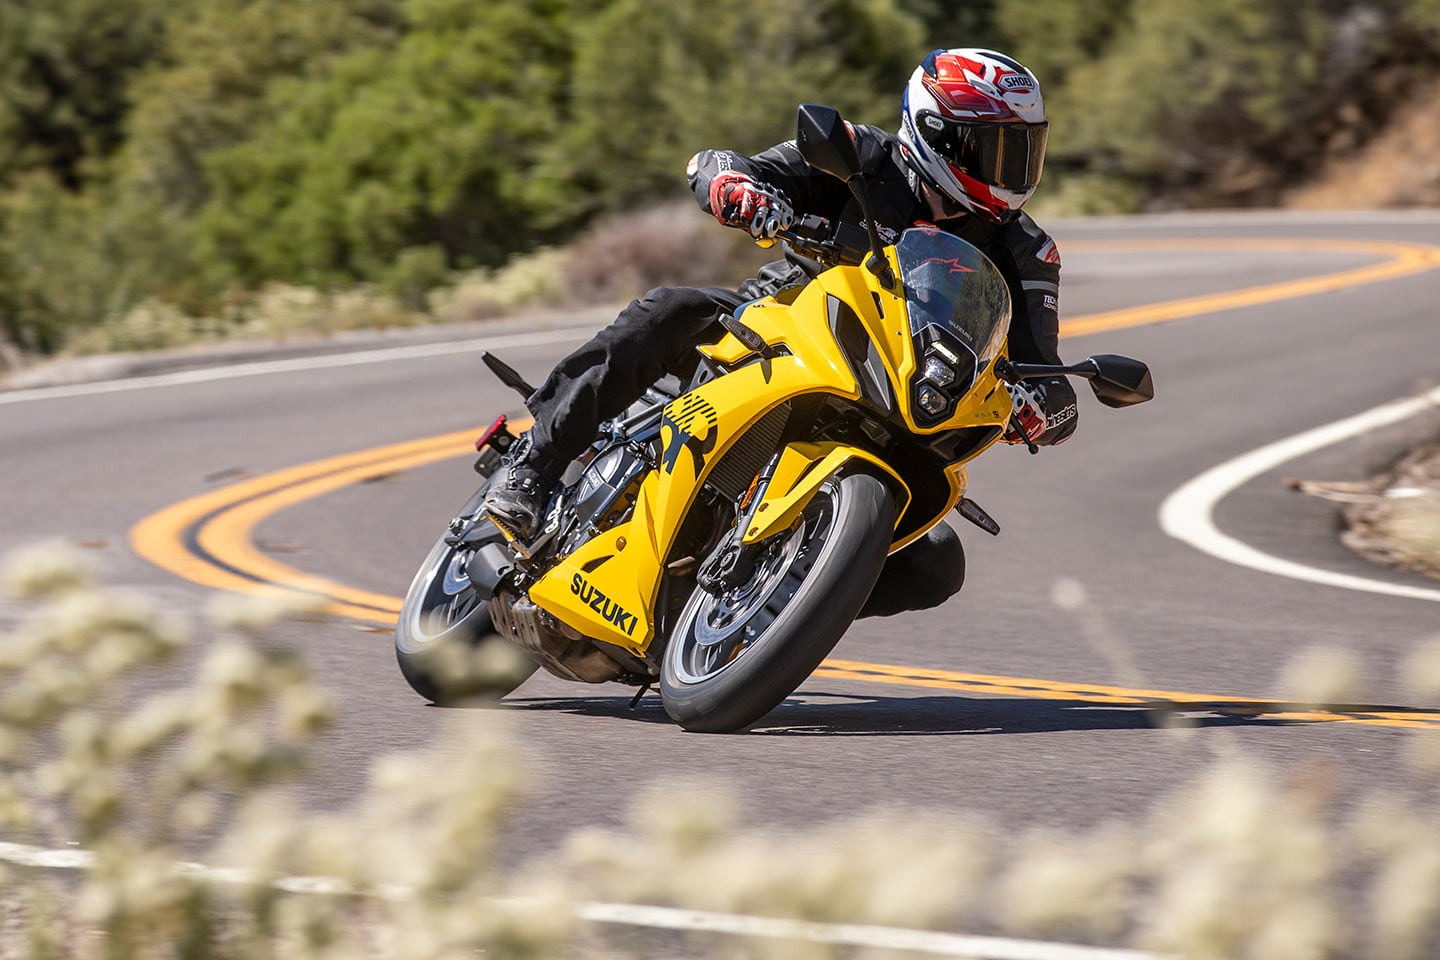 Suzuki’s GSX-8R is so well rounded, offering good handling, great stability, and really good suspension settings.